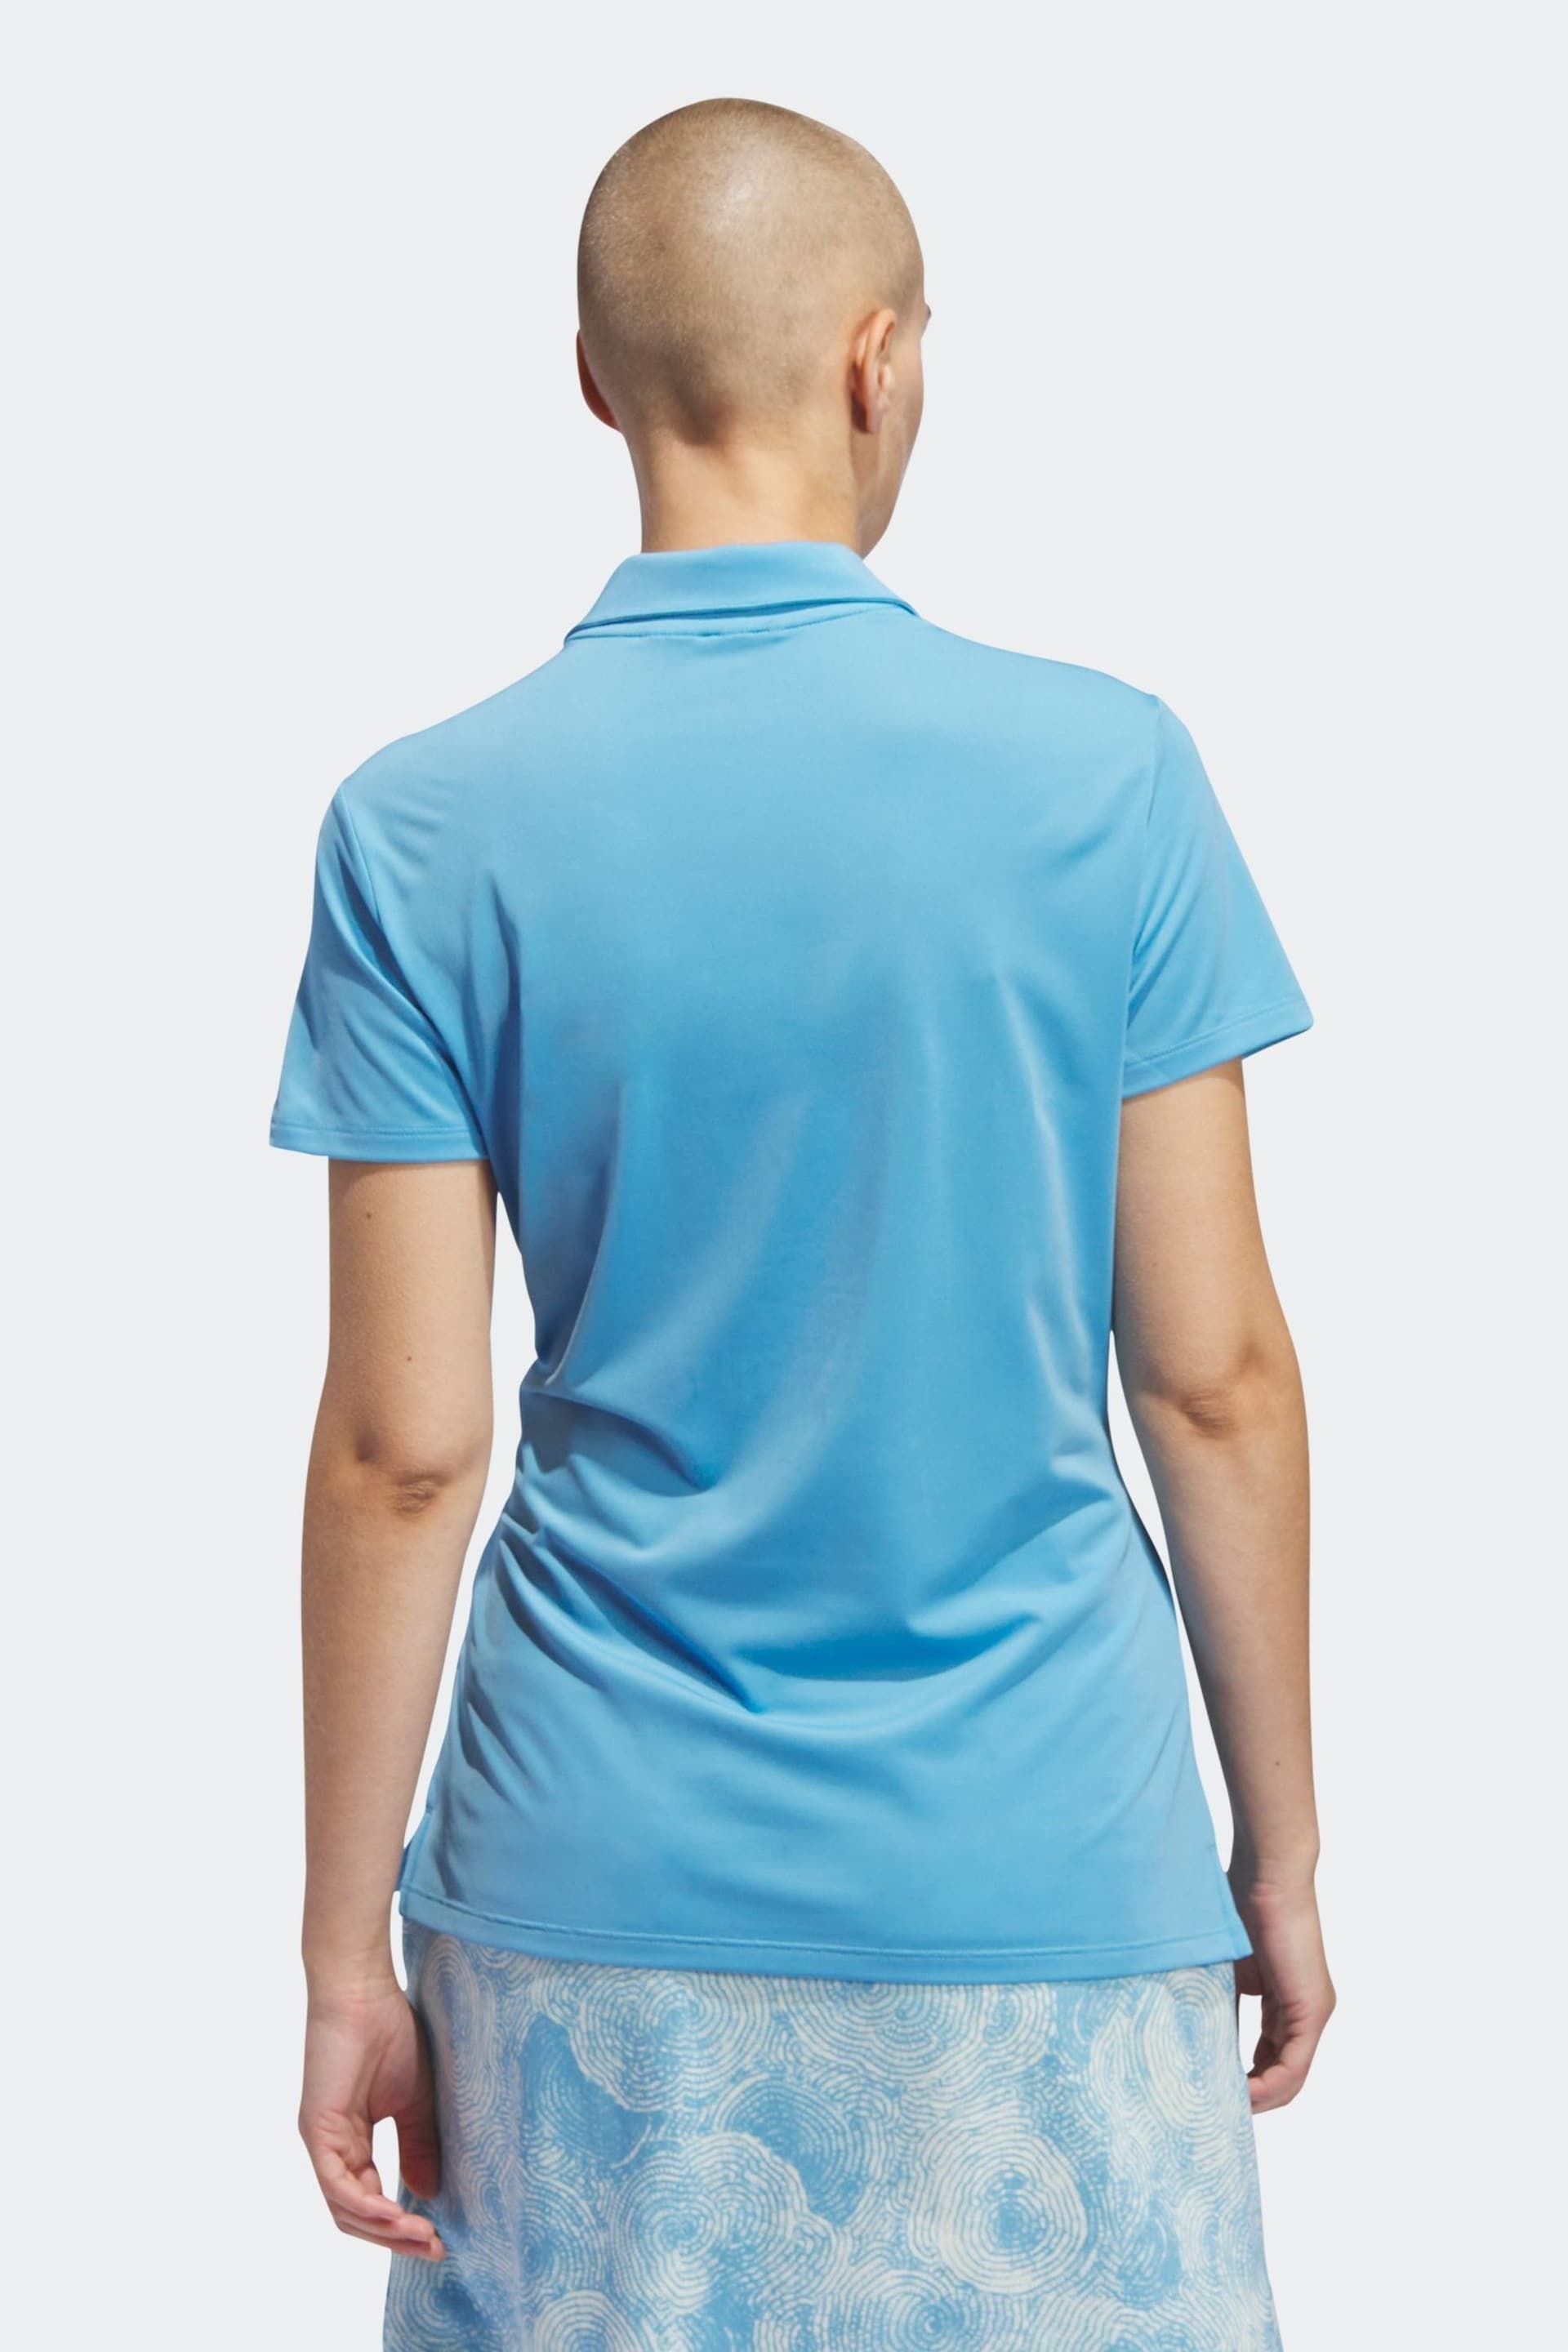 adidas Golf Bright Blue Performance Ultimate365 Solid Short Sleeve Polo Shirt - Image 2 of 5